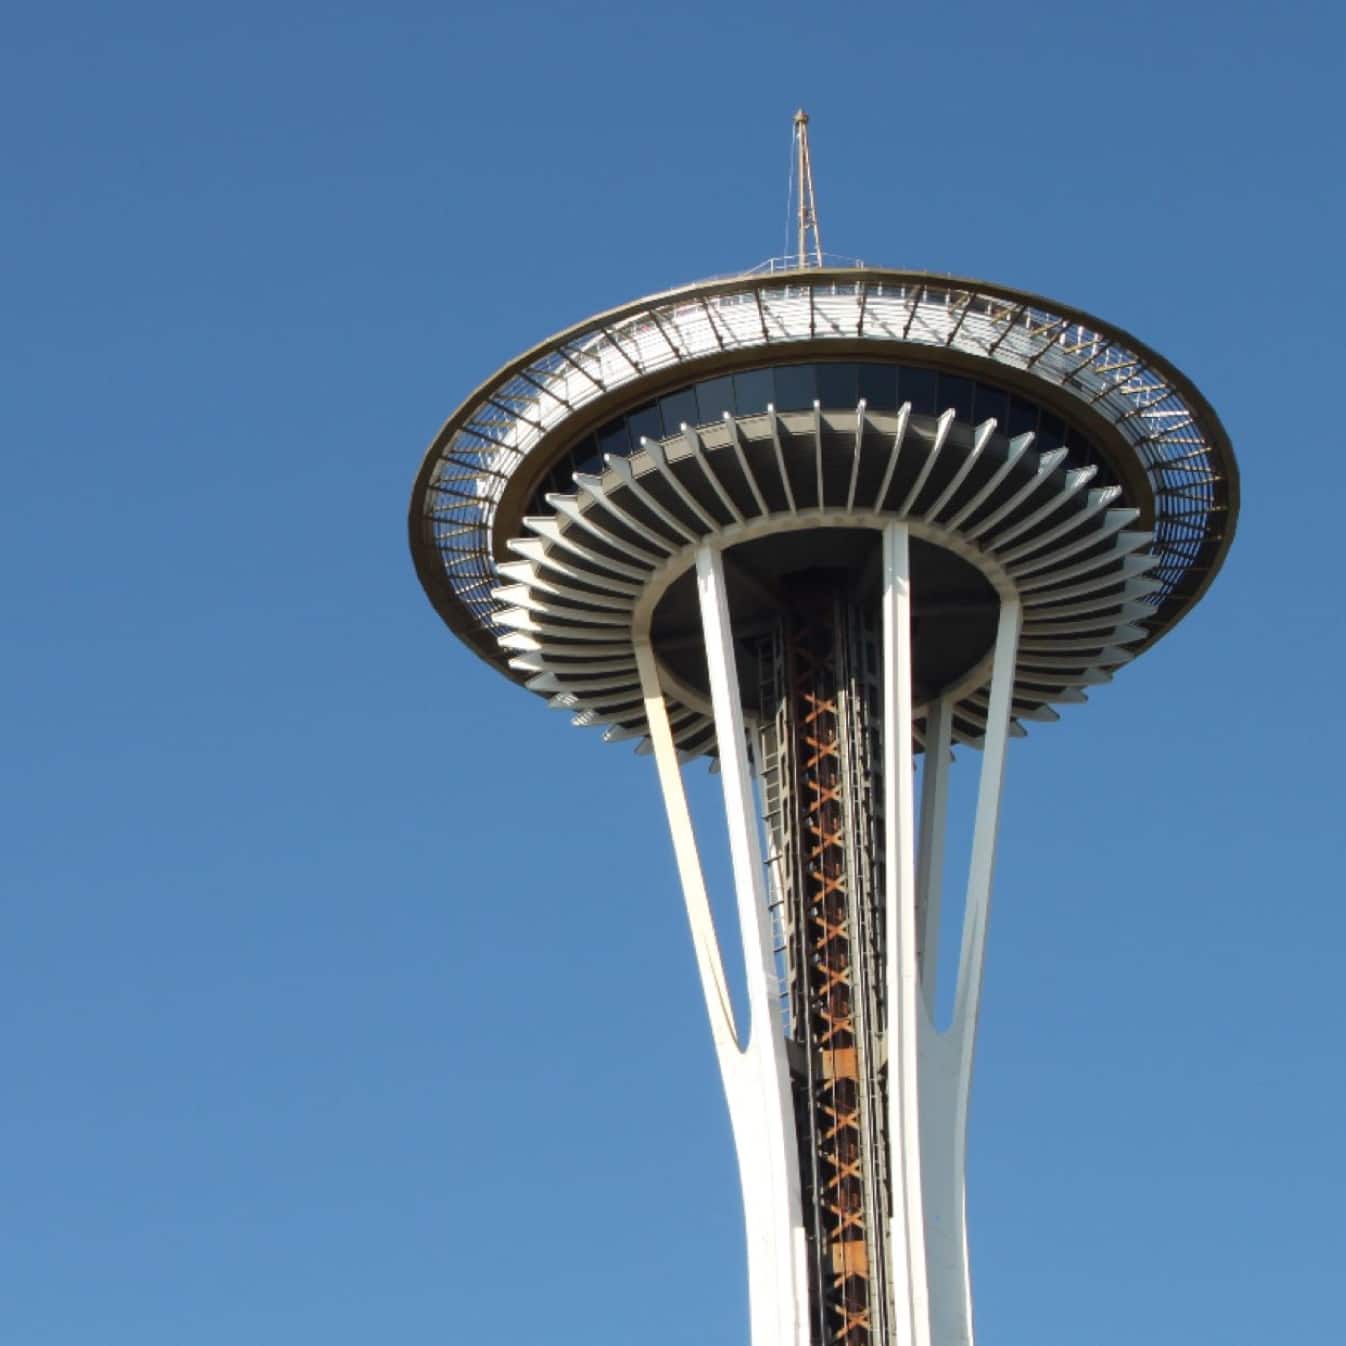 The Space Needle in downtown Seattle.